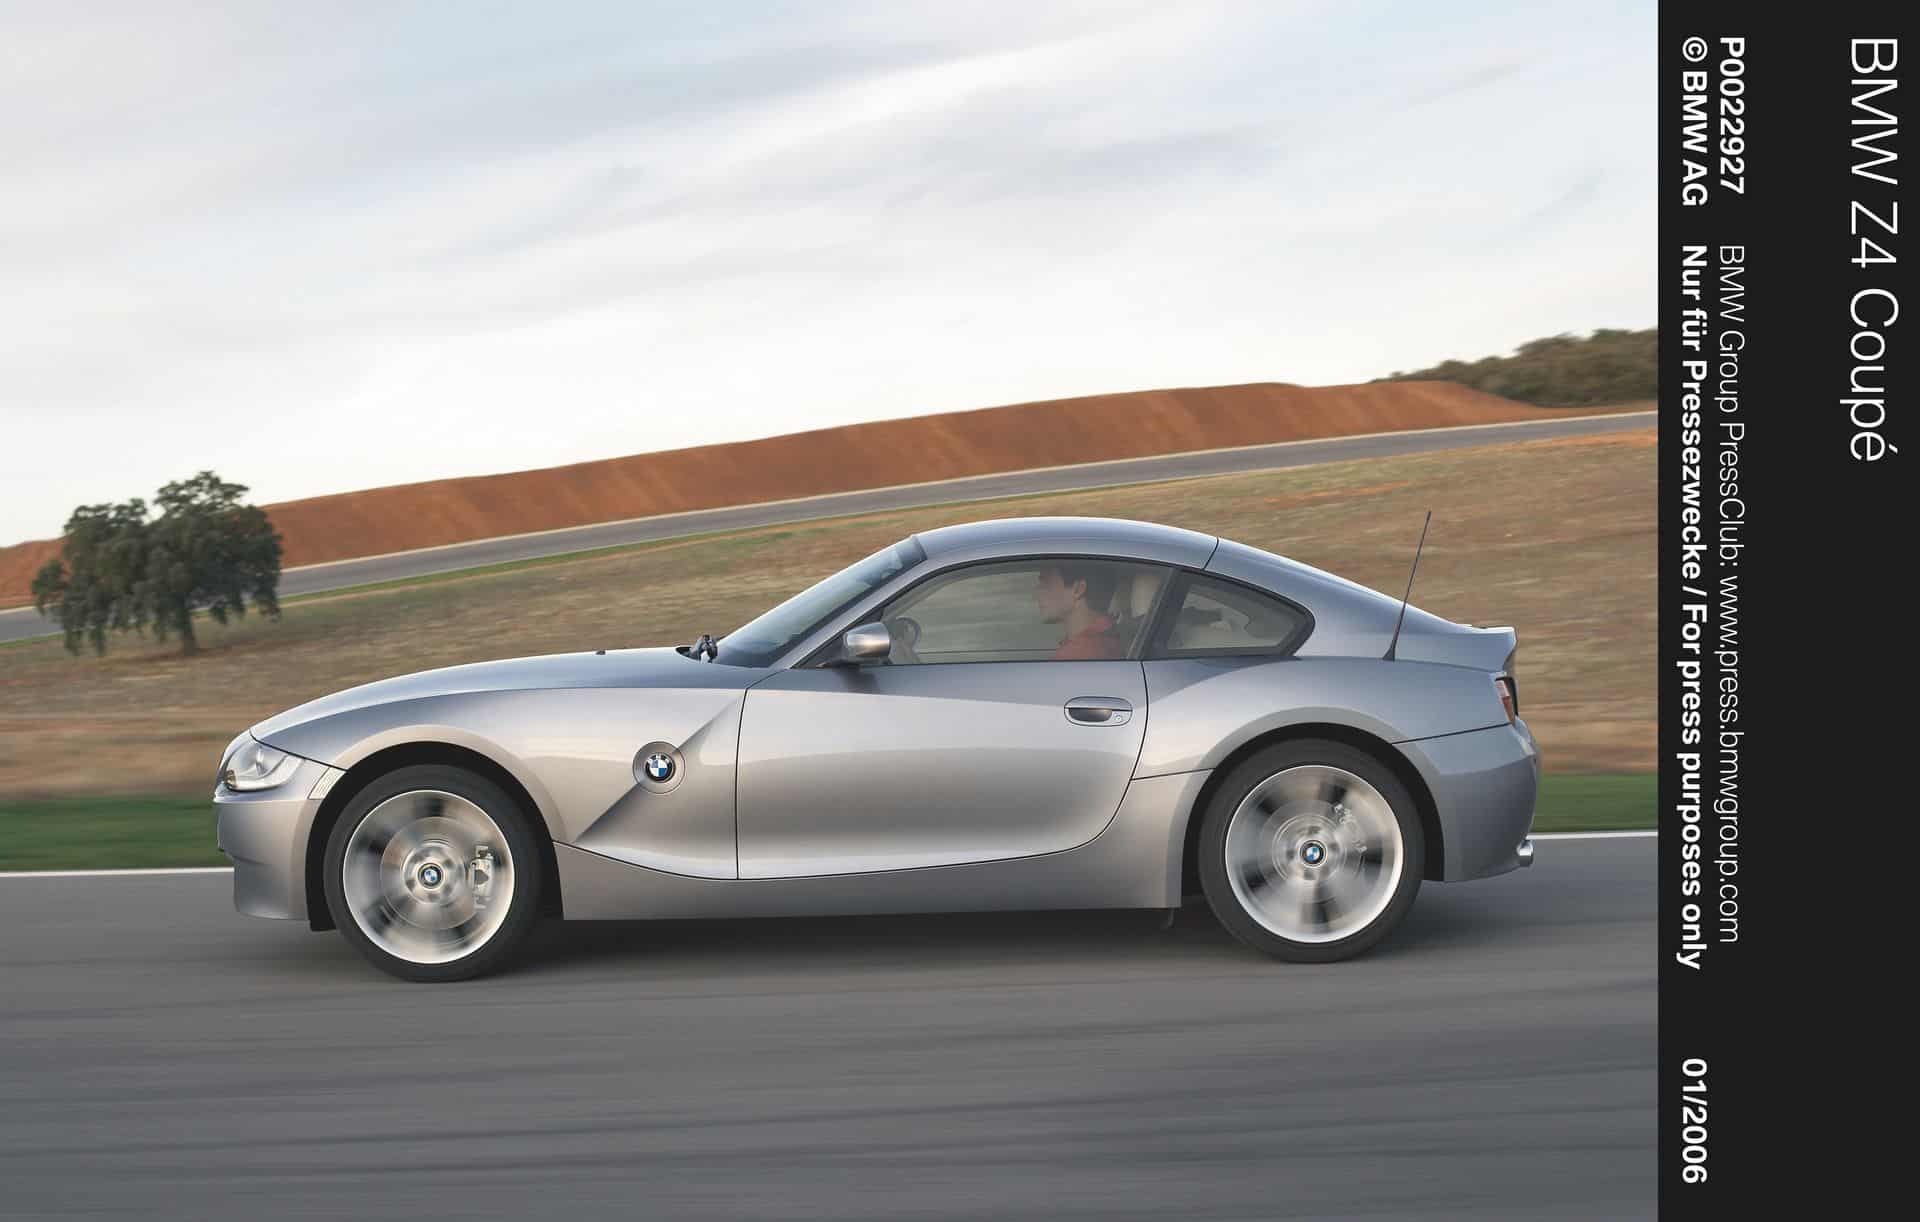 BMW Z4 (E86) 3.0Si Coupe - Buyer's Guide